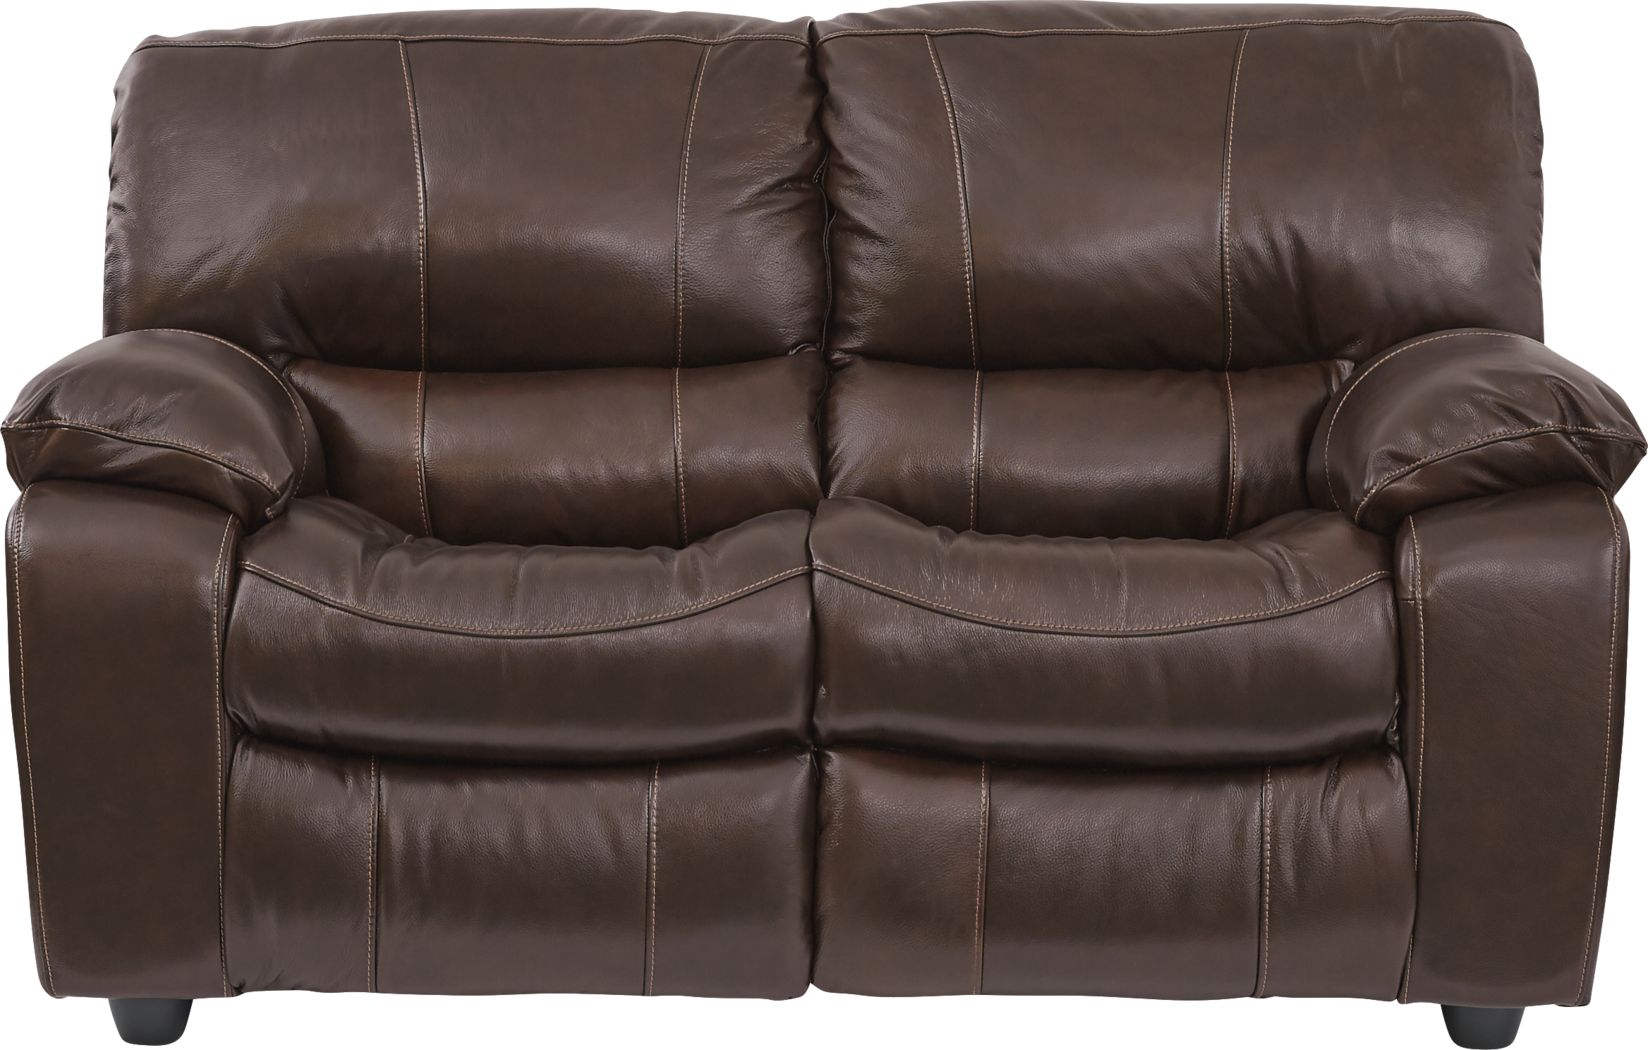 Brown Leather Loveseats, Brown Faux Leather Loveseat Recliner